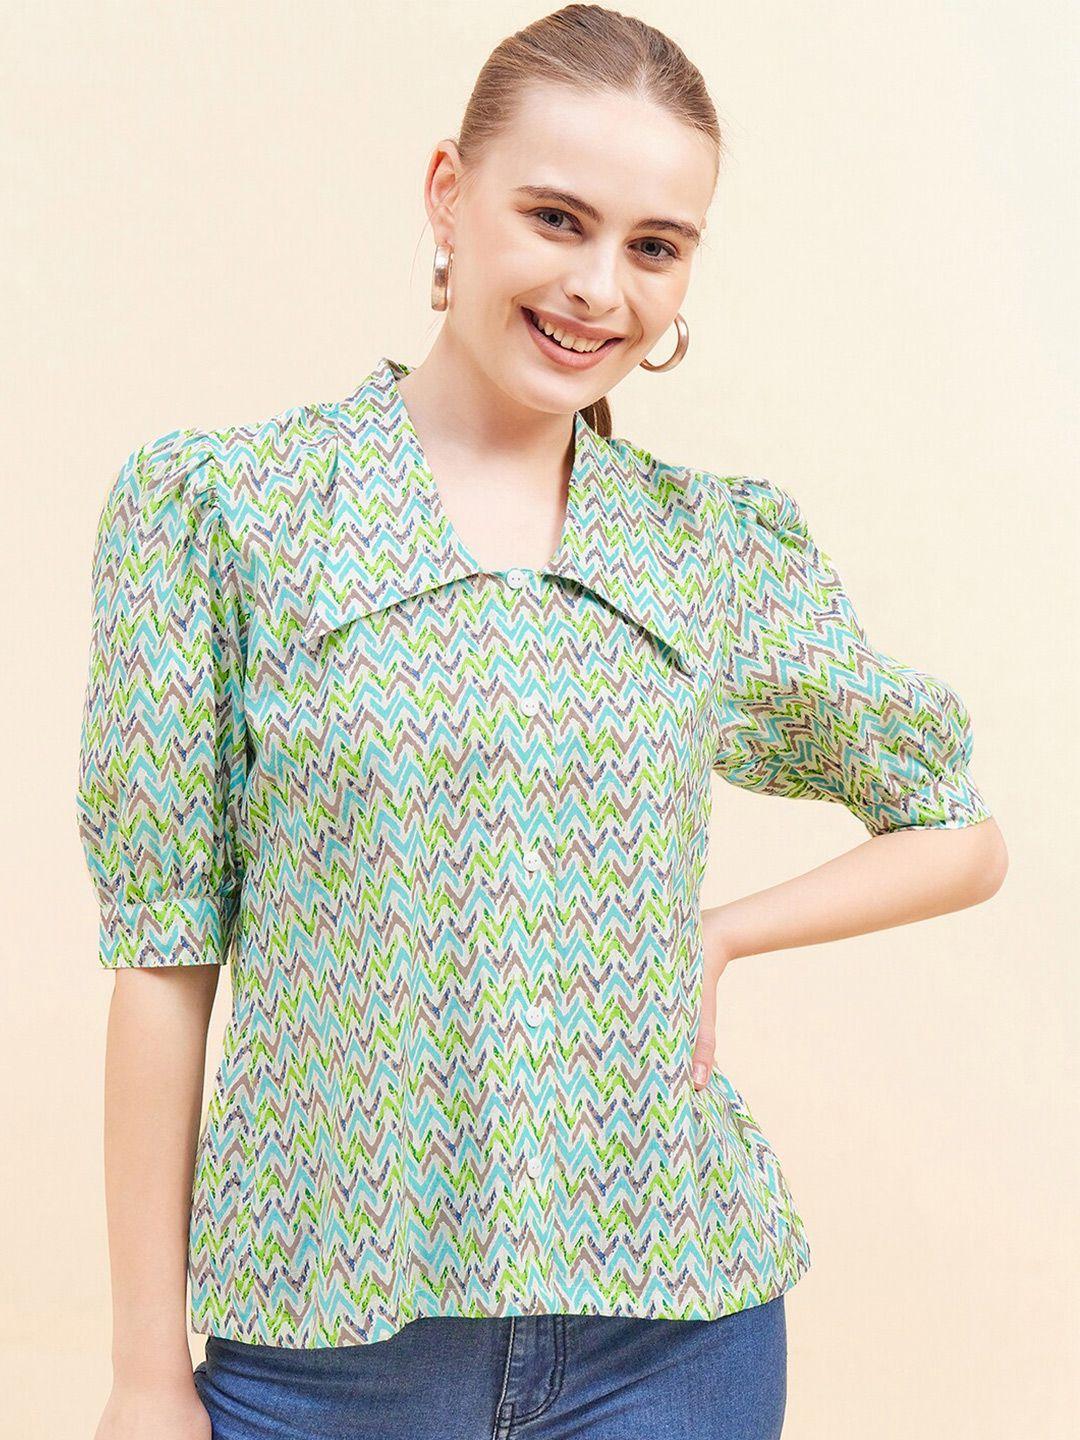 mast & harbour green & mauve abstract printed cotton shirt style top